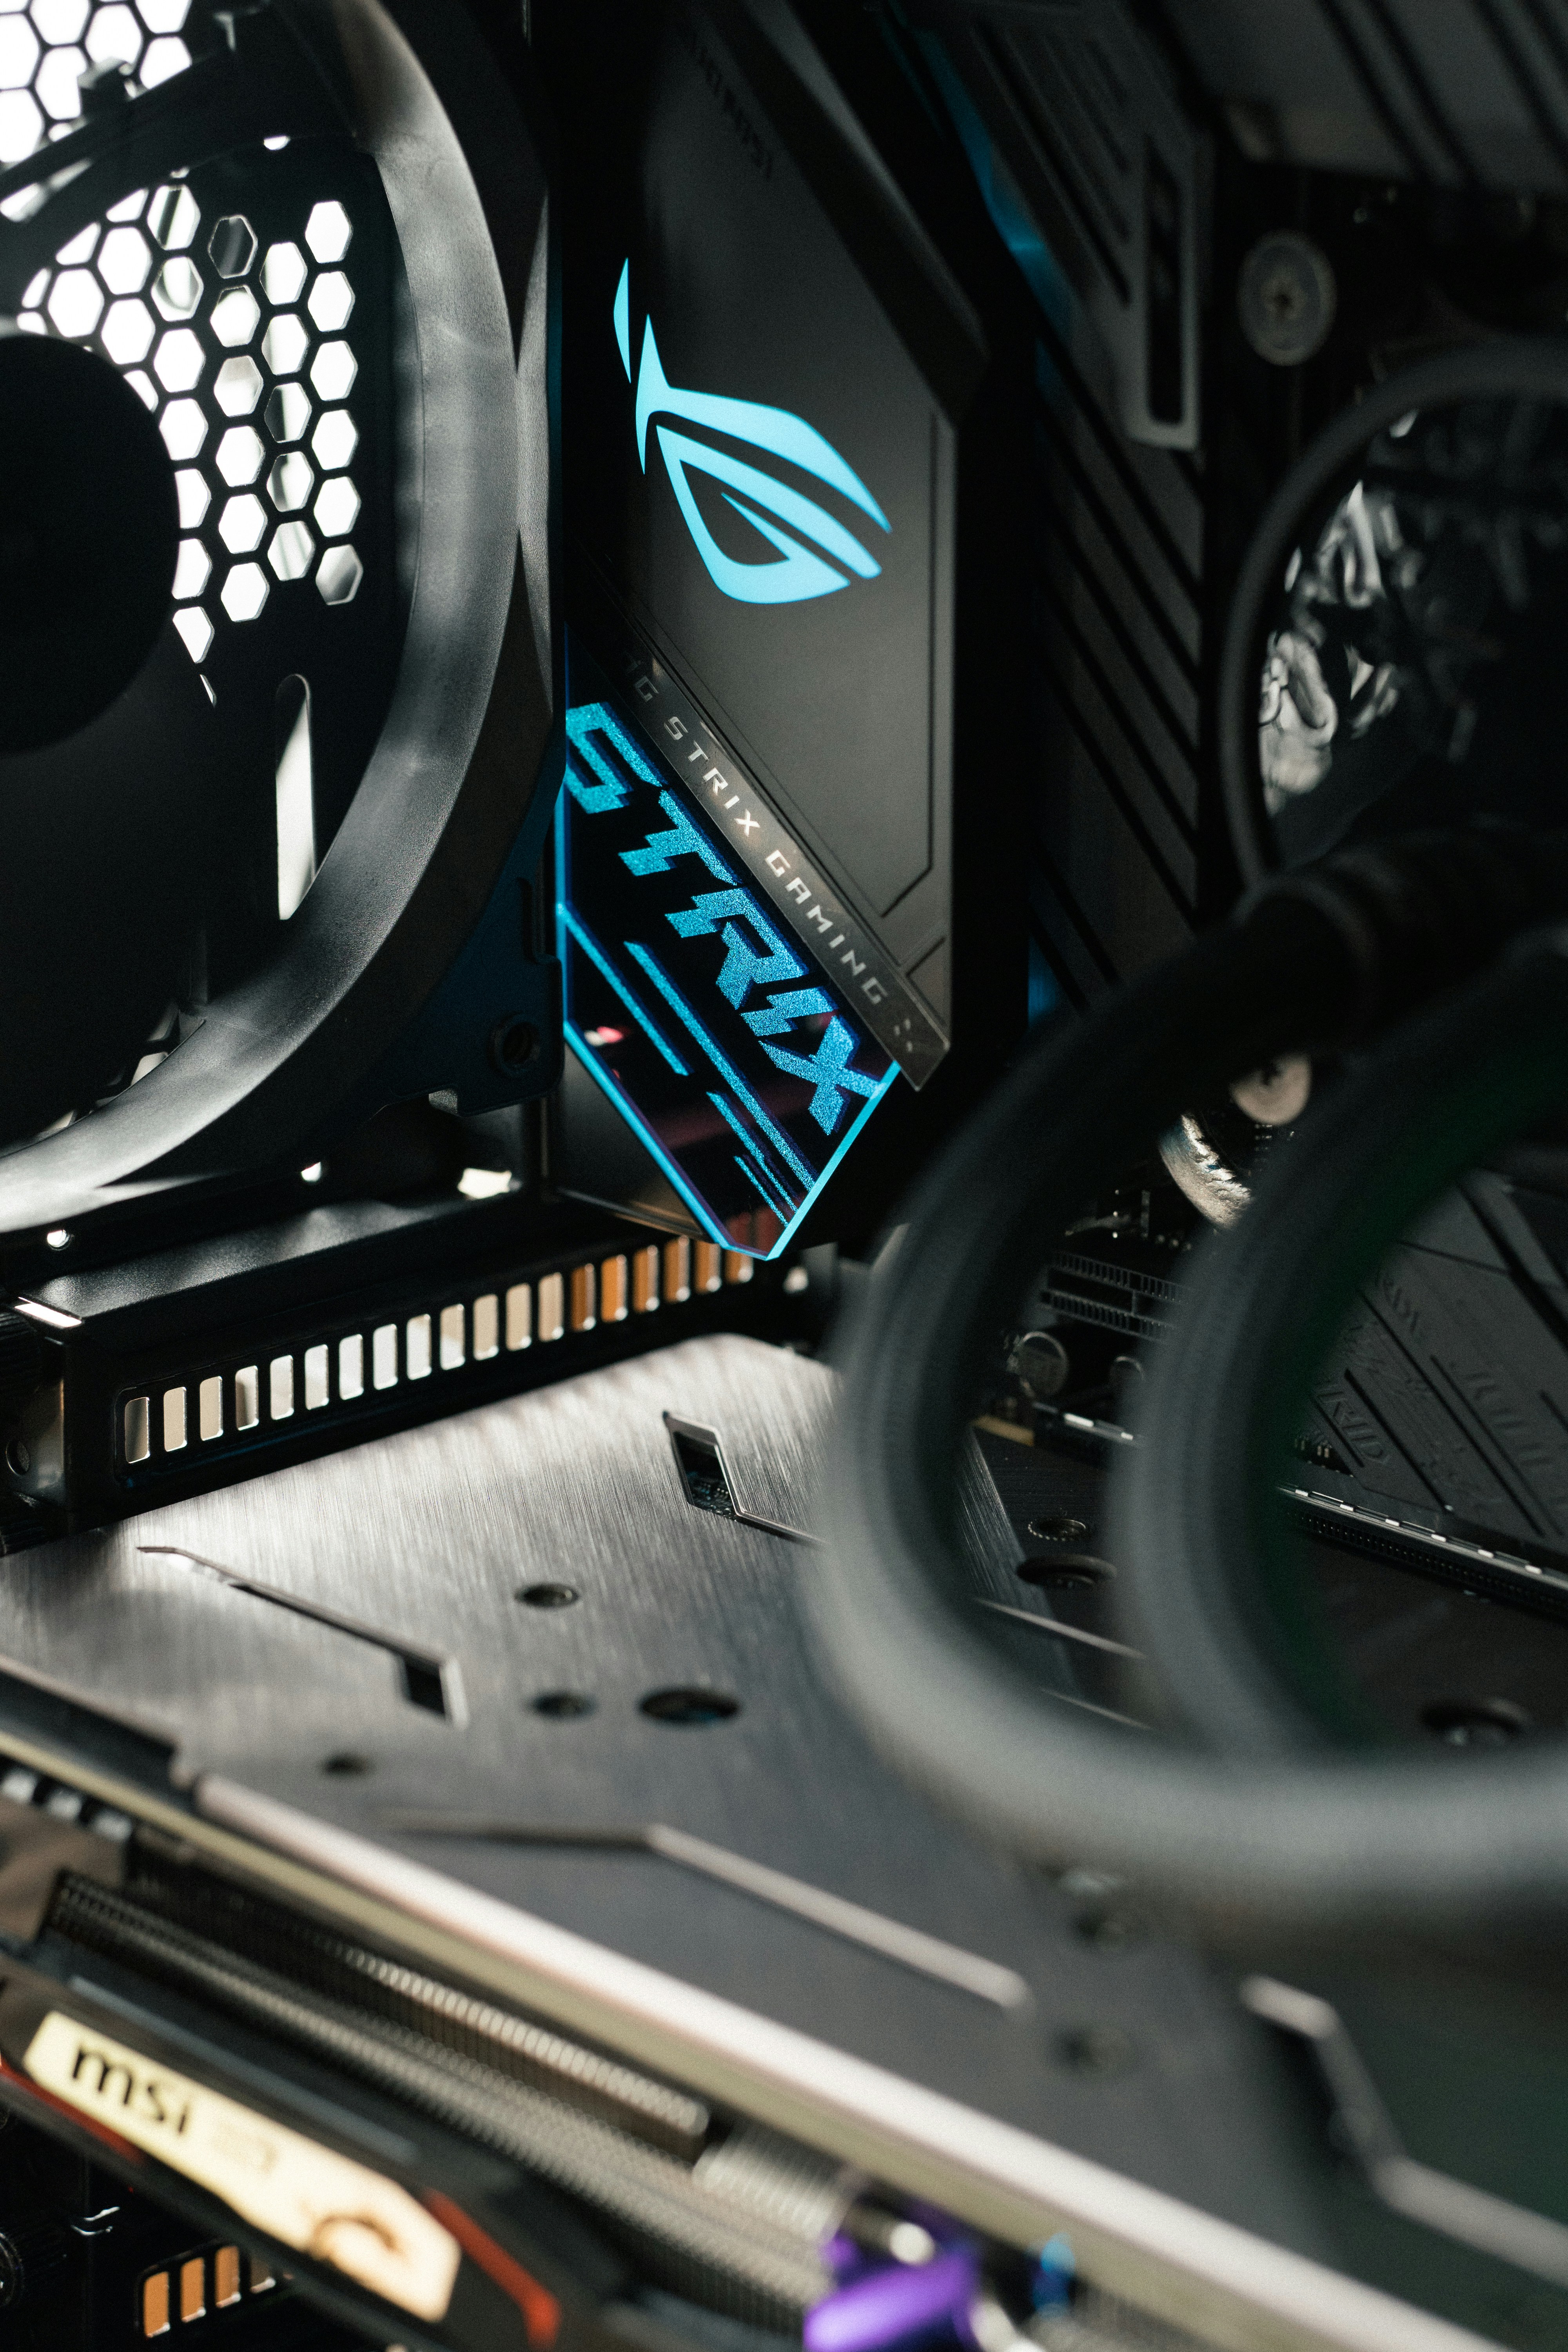 How to Install Liquid Cooling on CPU